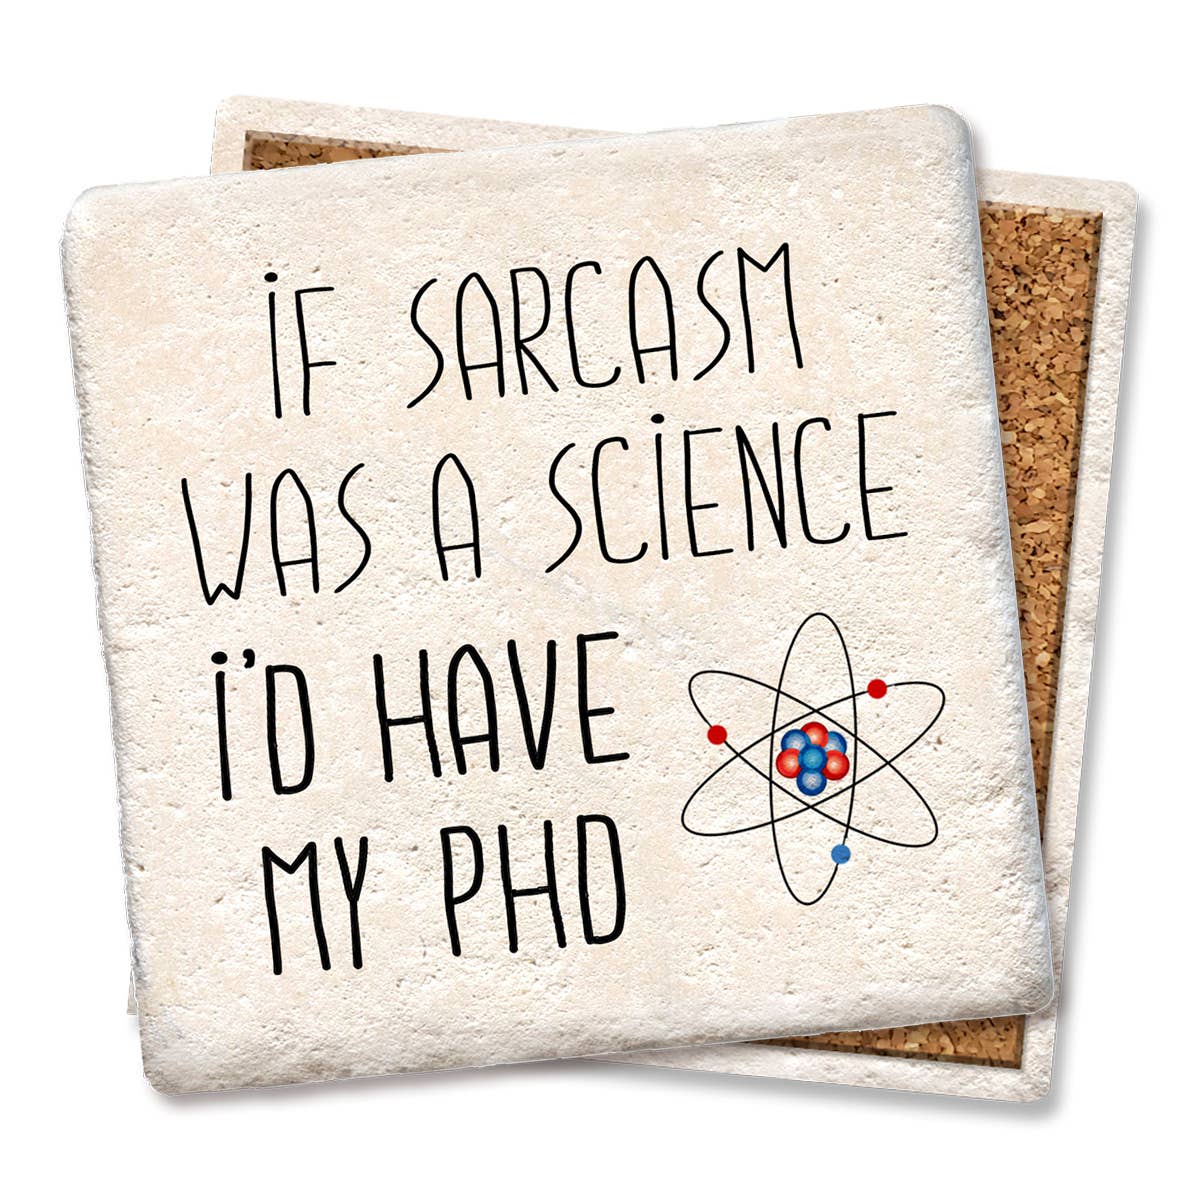 If Sarcasm Was a Science Coaster